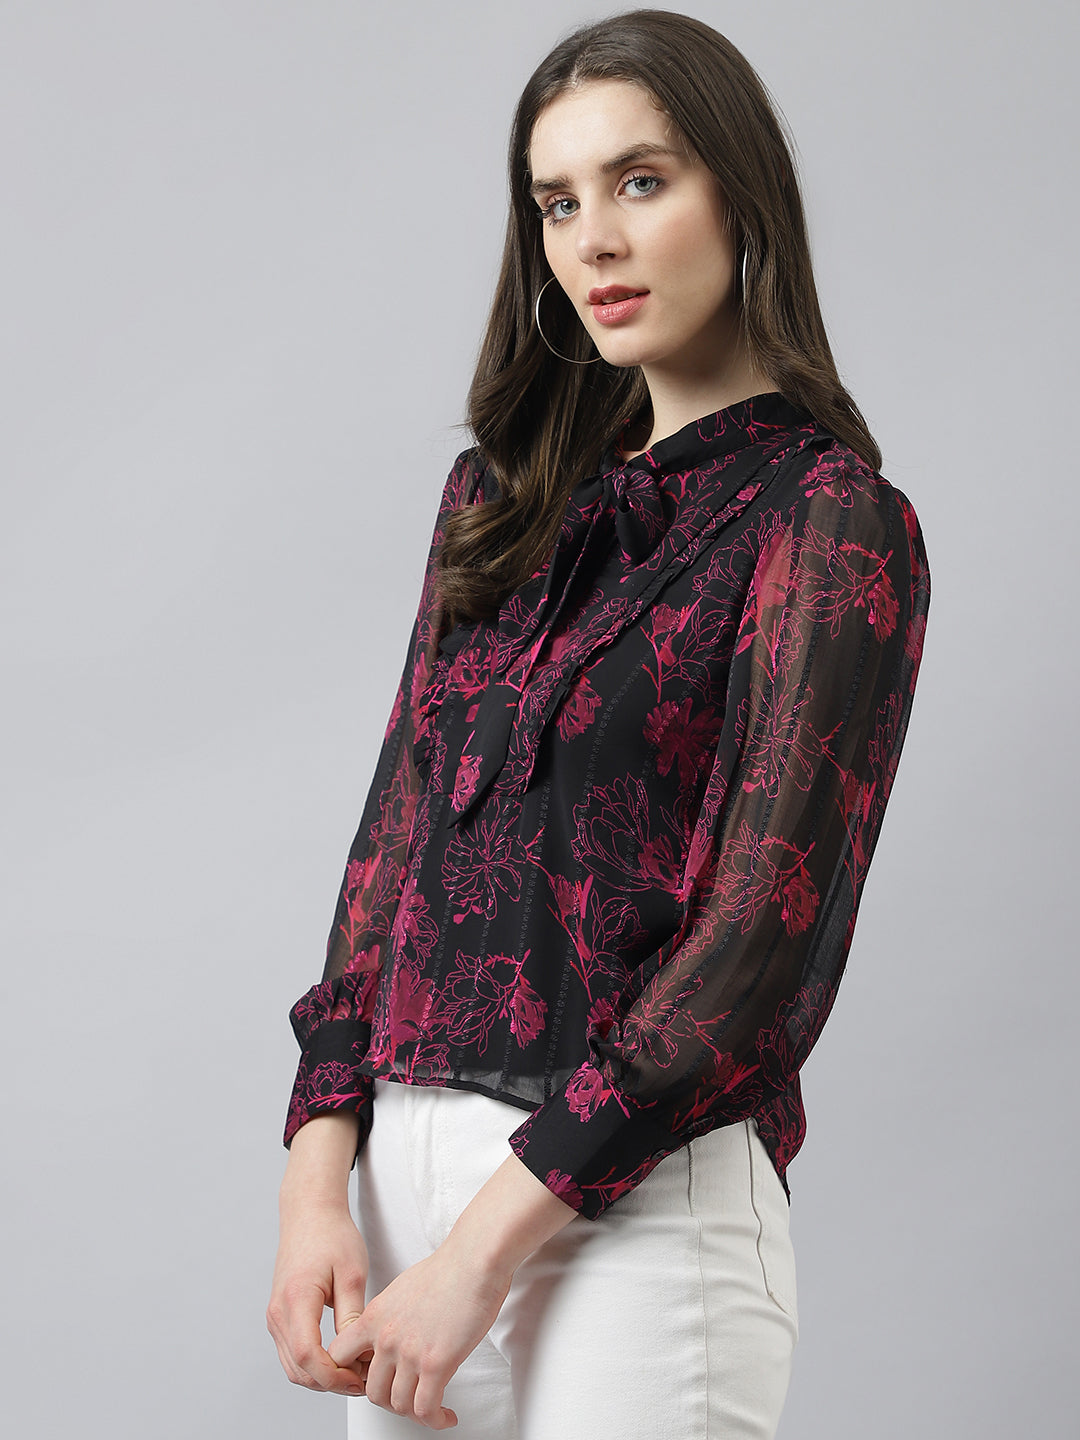 Black Tie-Up Neck Long Sleeves Printed Top For Casual Wear